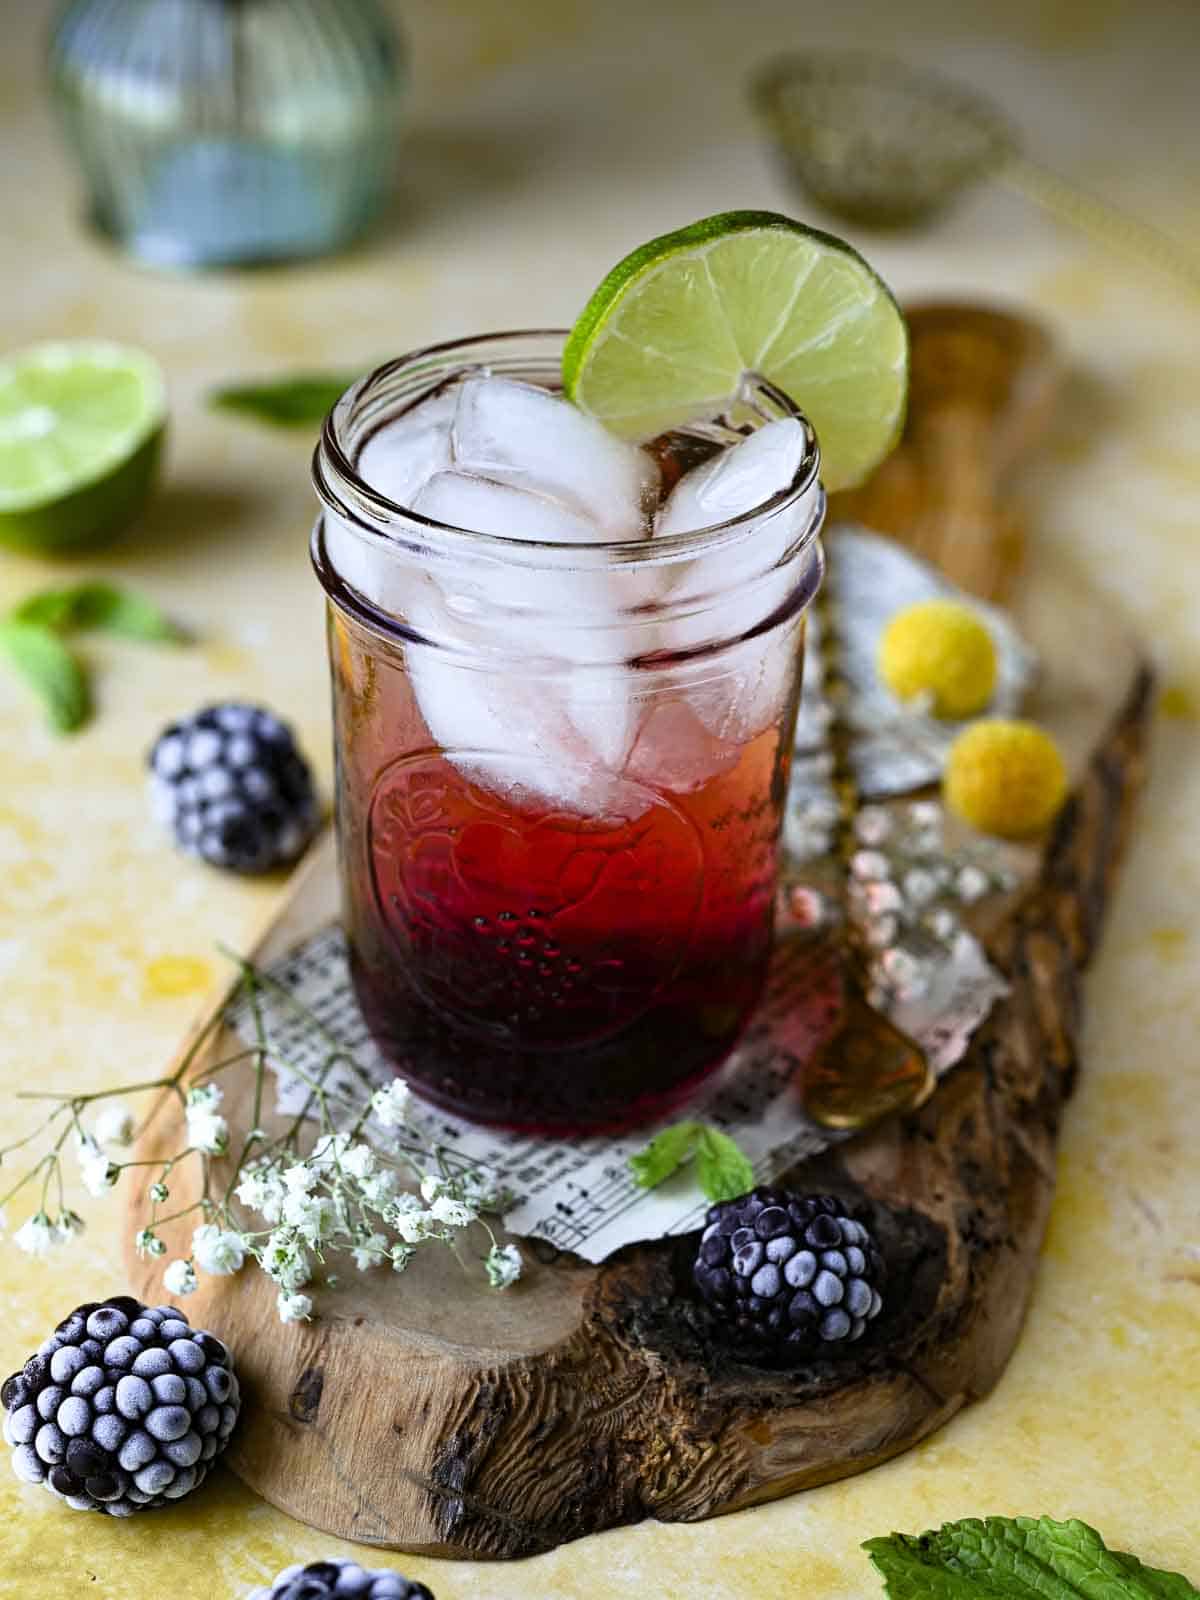 Blackberry soda in a clear glass on wood with blackberries and flowers around it.